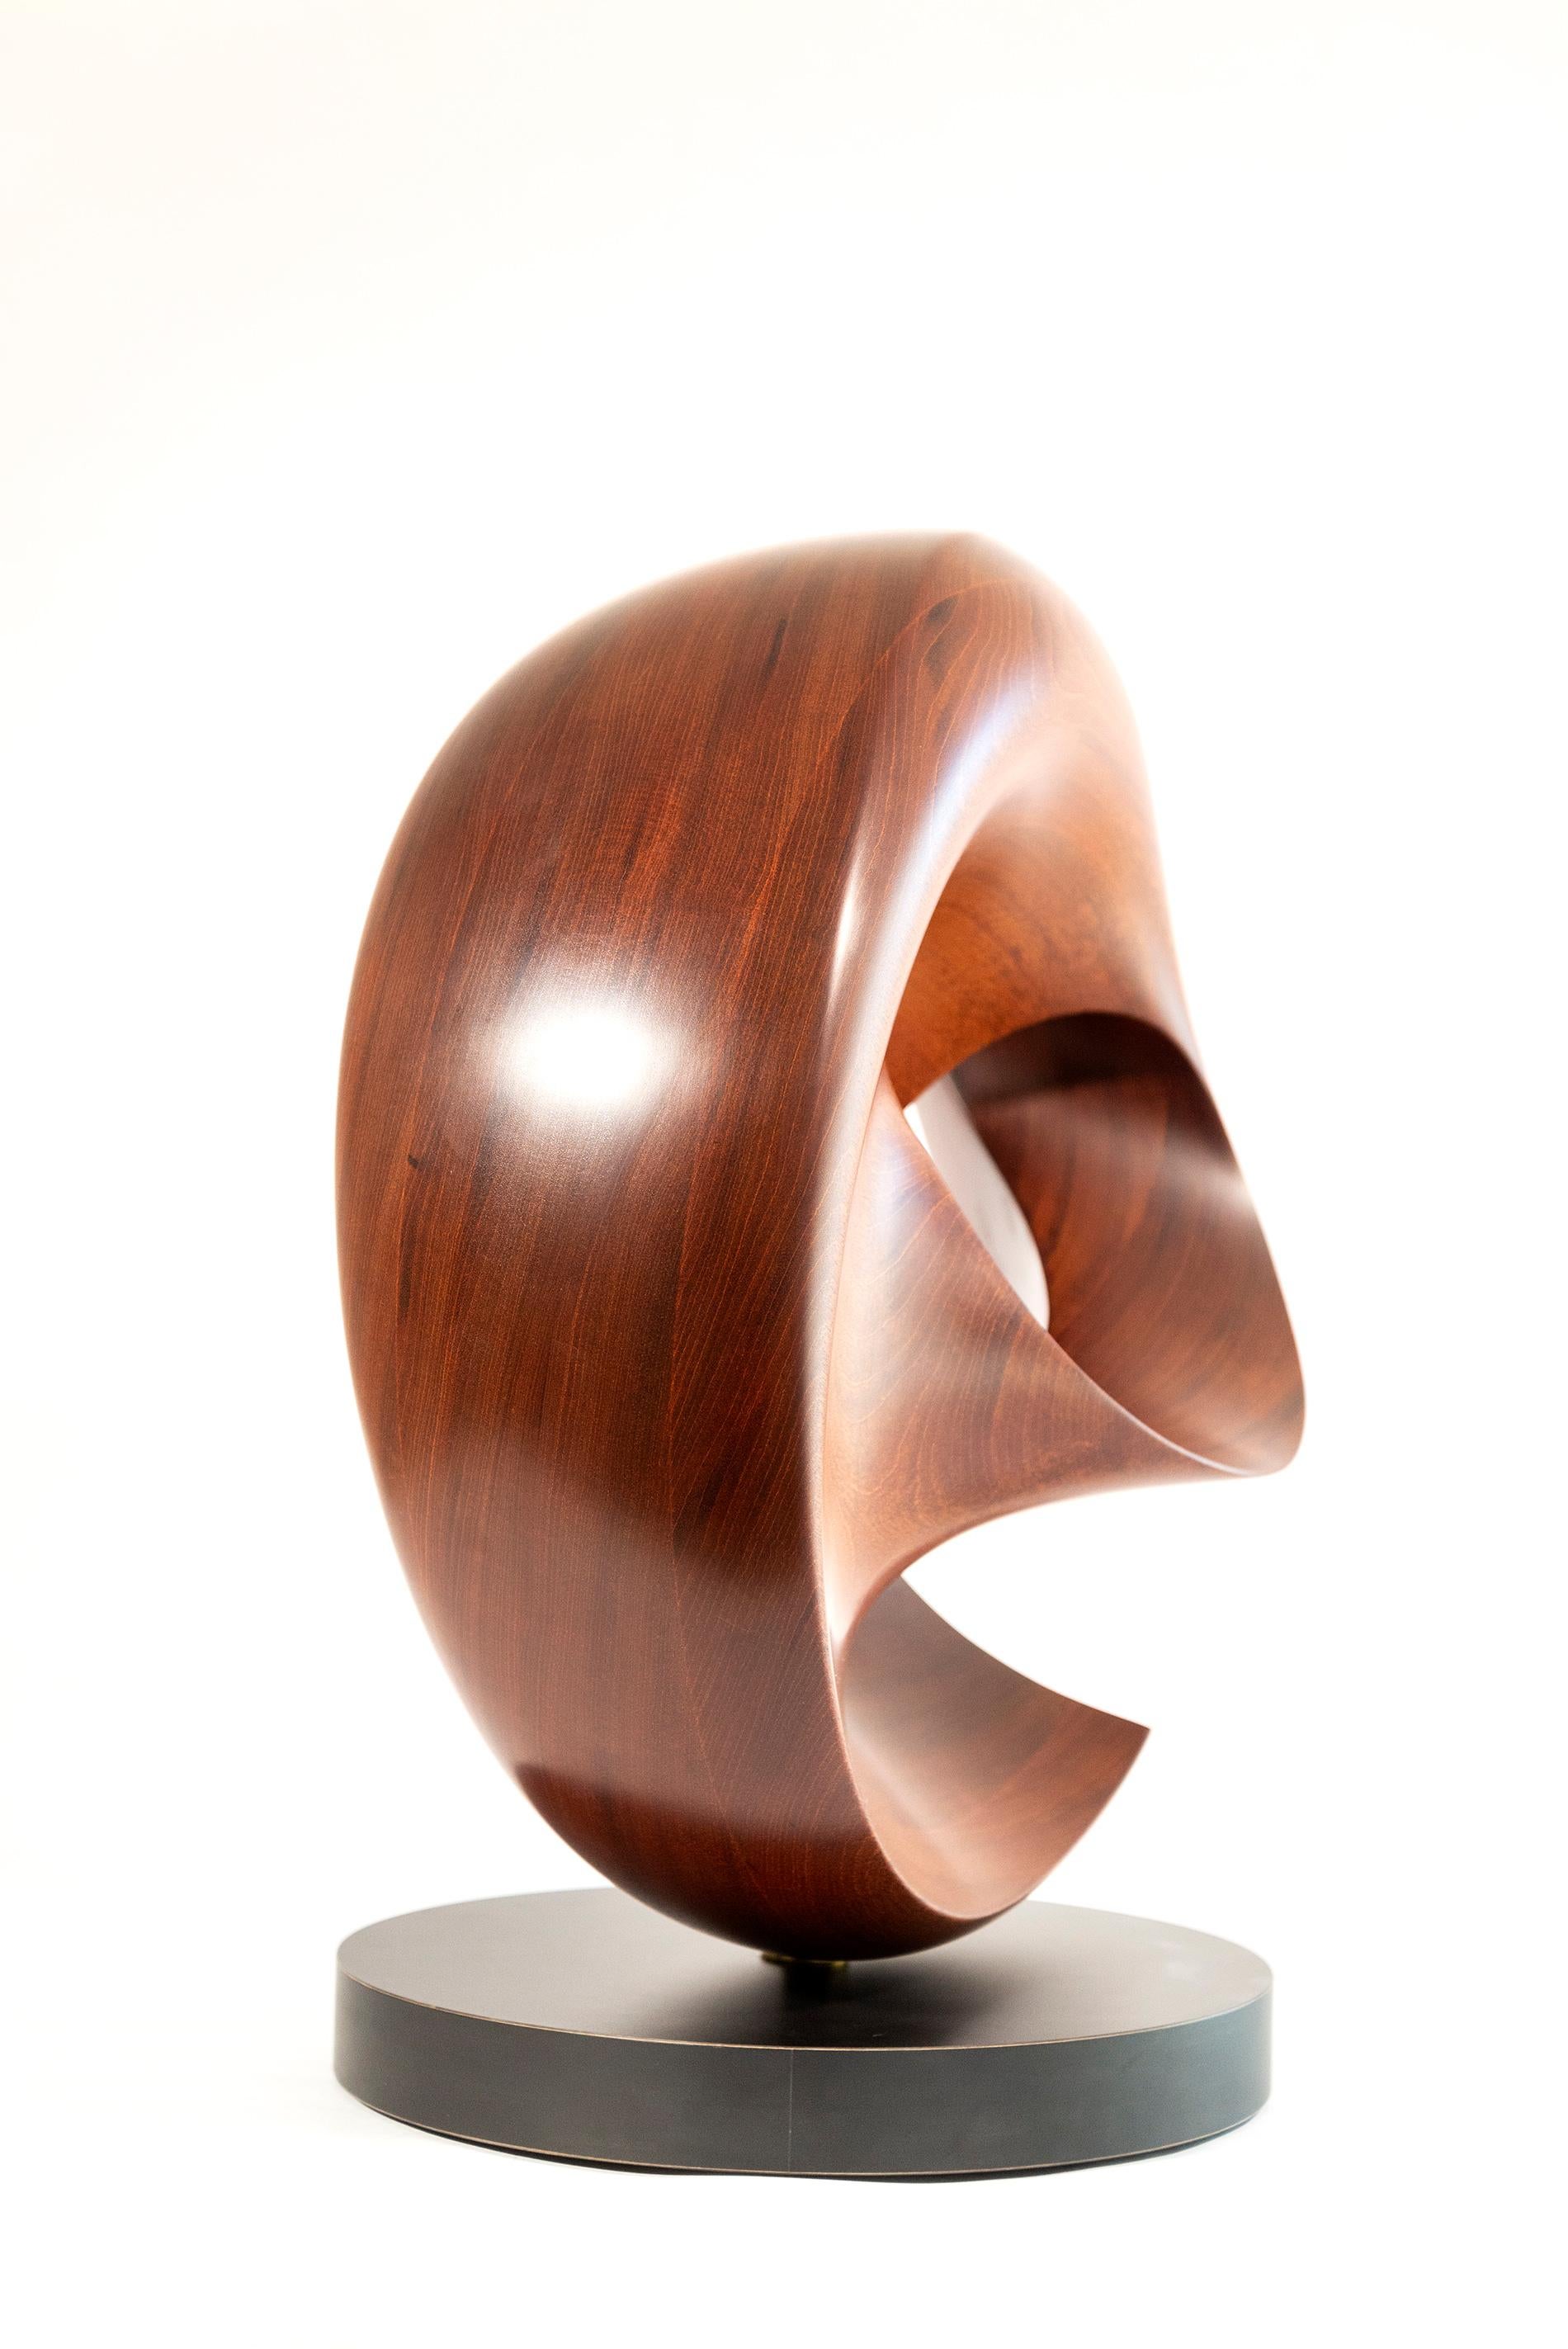 Fanfare - smooth, polished, abstract, contemporary, mahogany carved sculpture For Sale 3